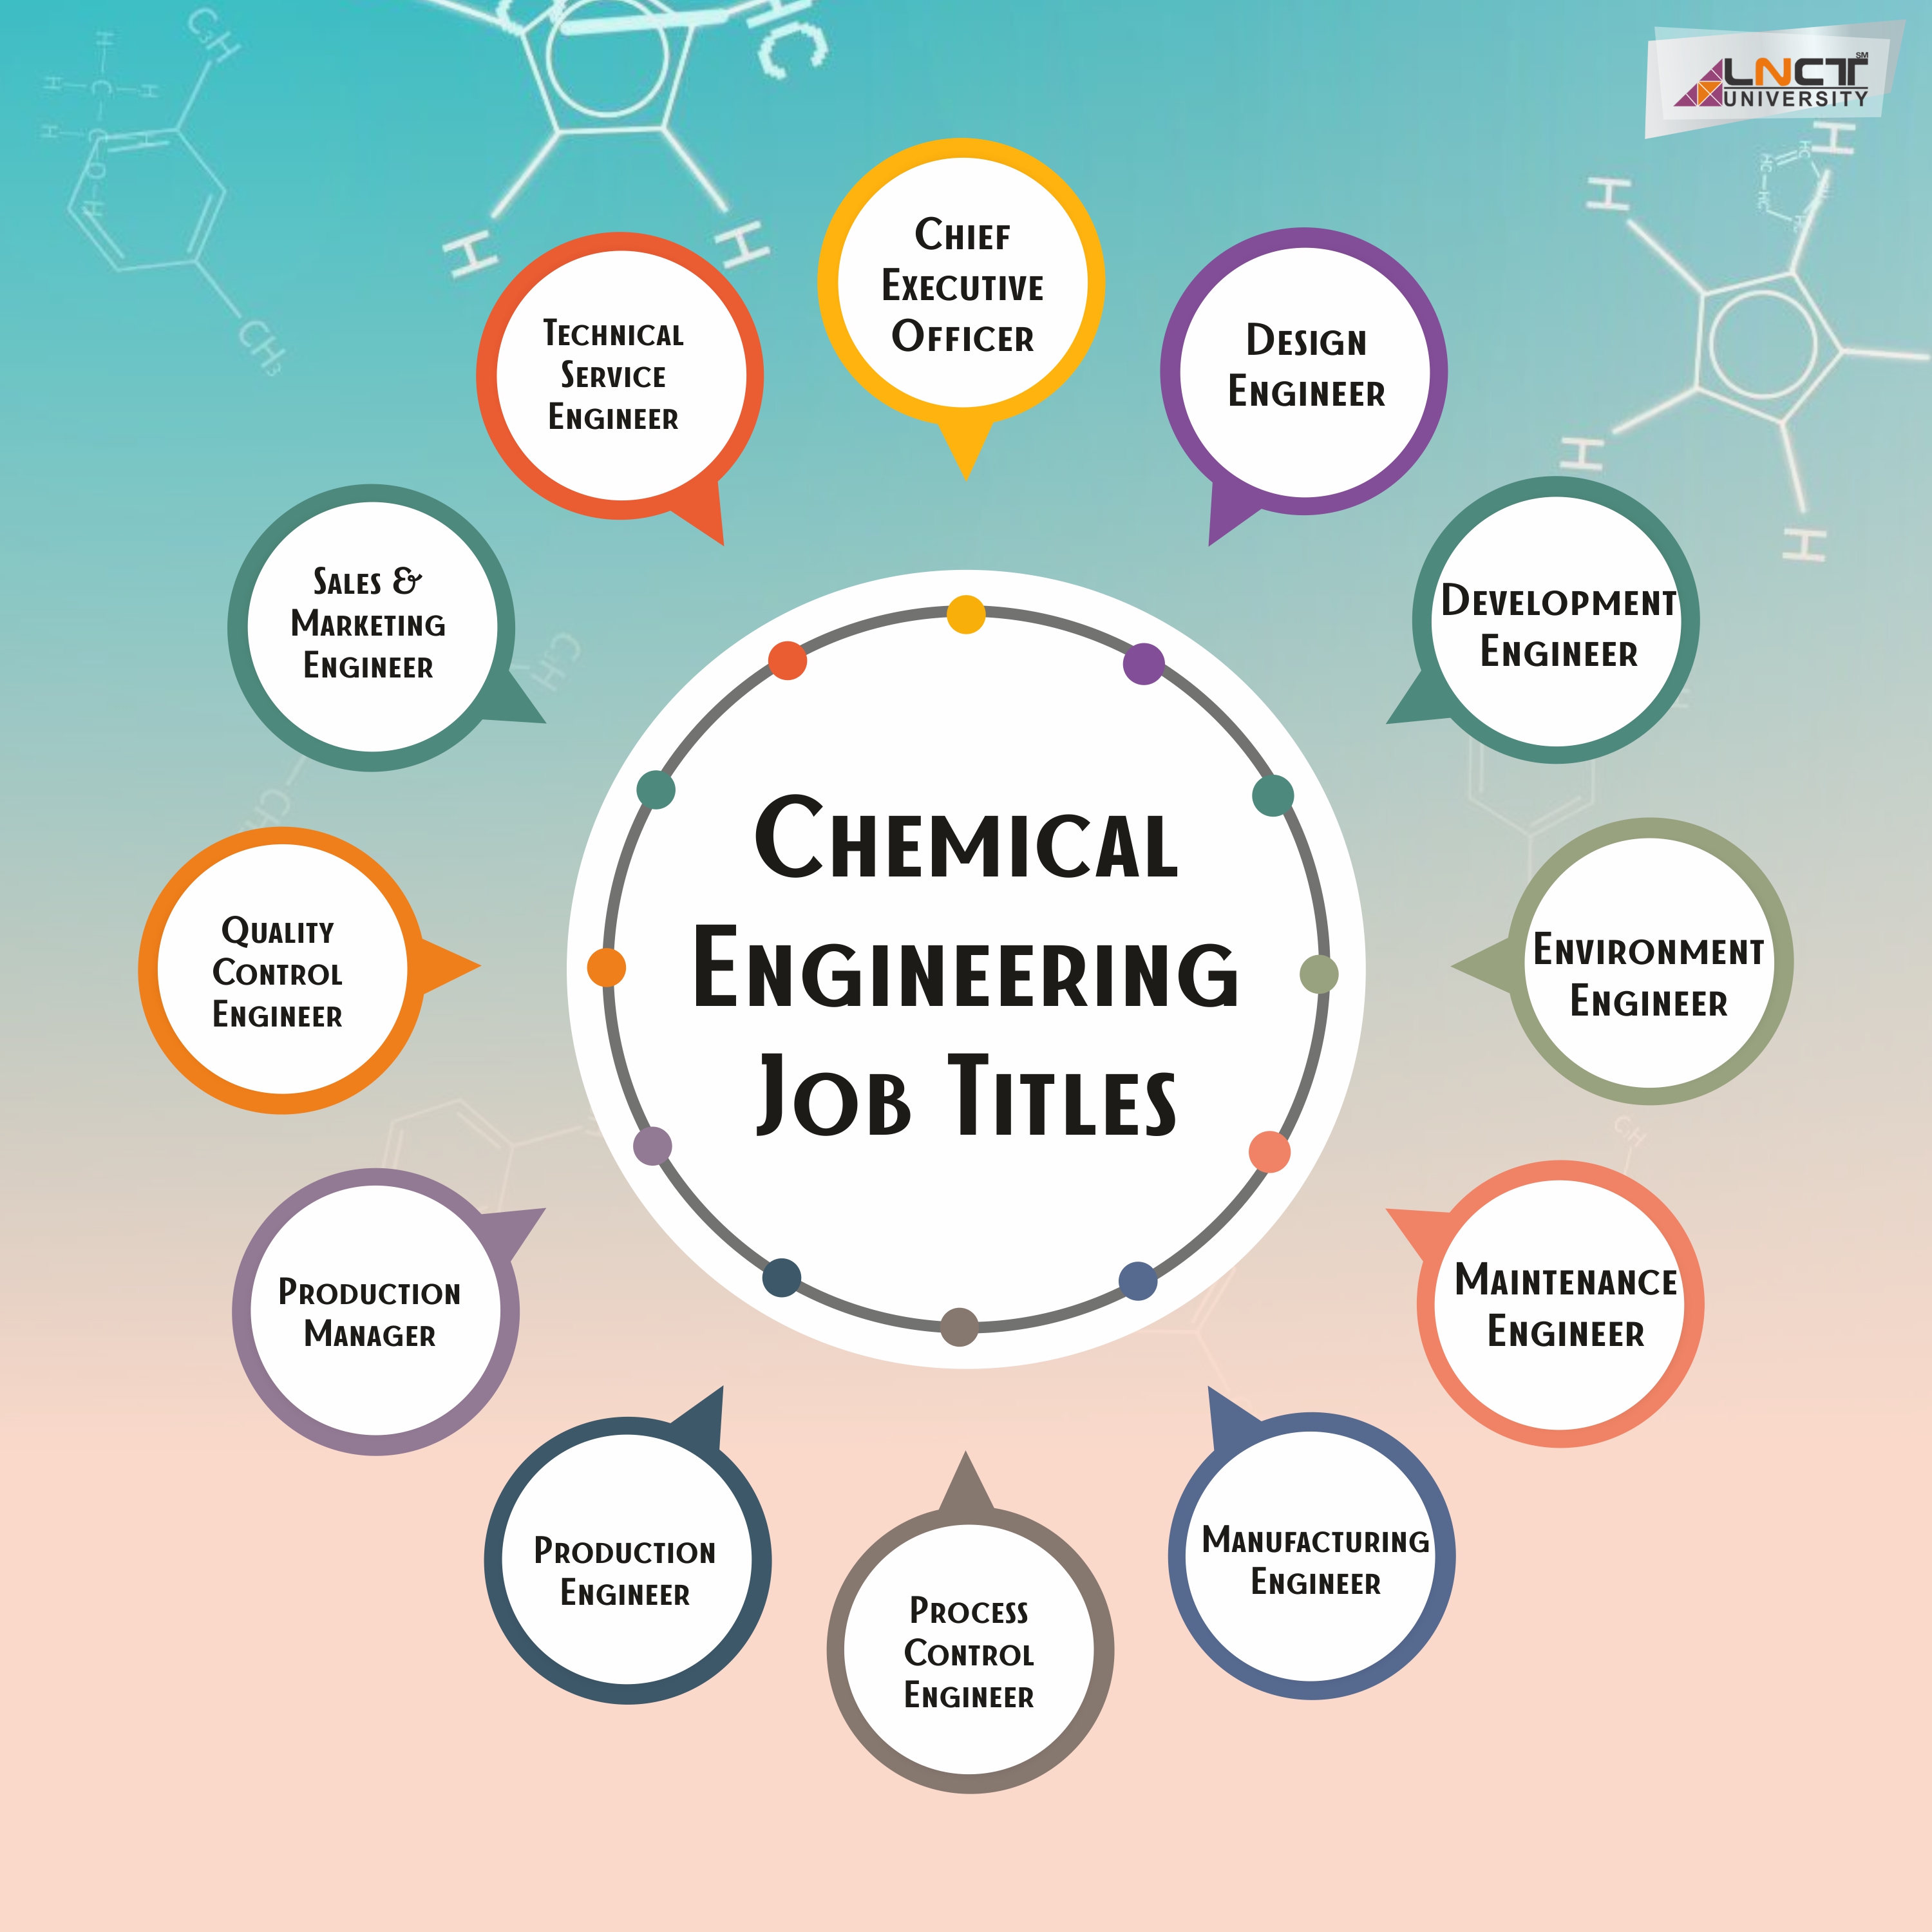 Chemical Engineering By 2025 | LNCT Group